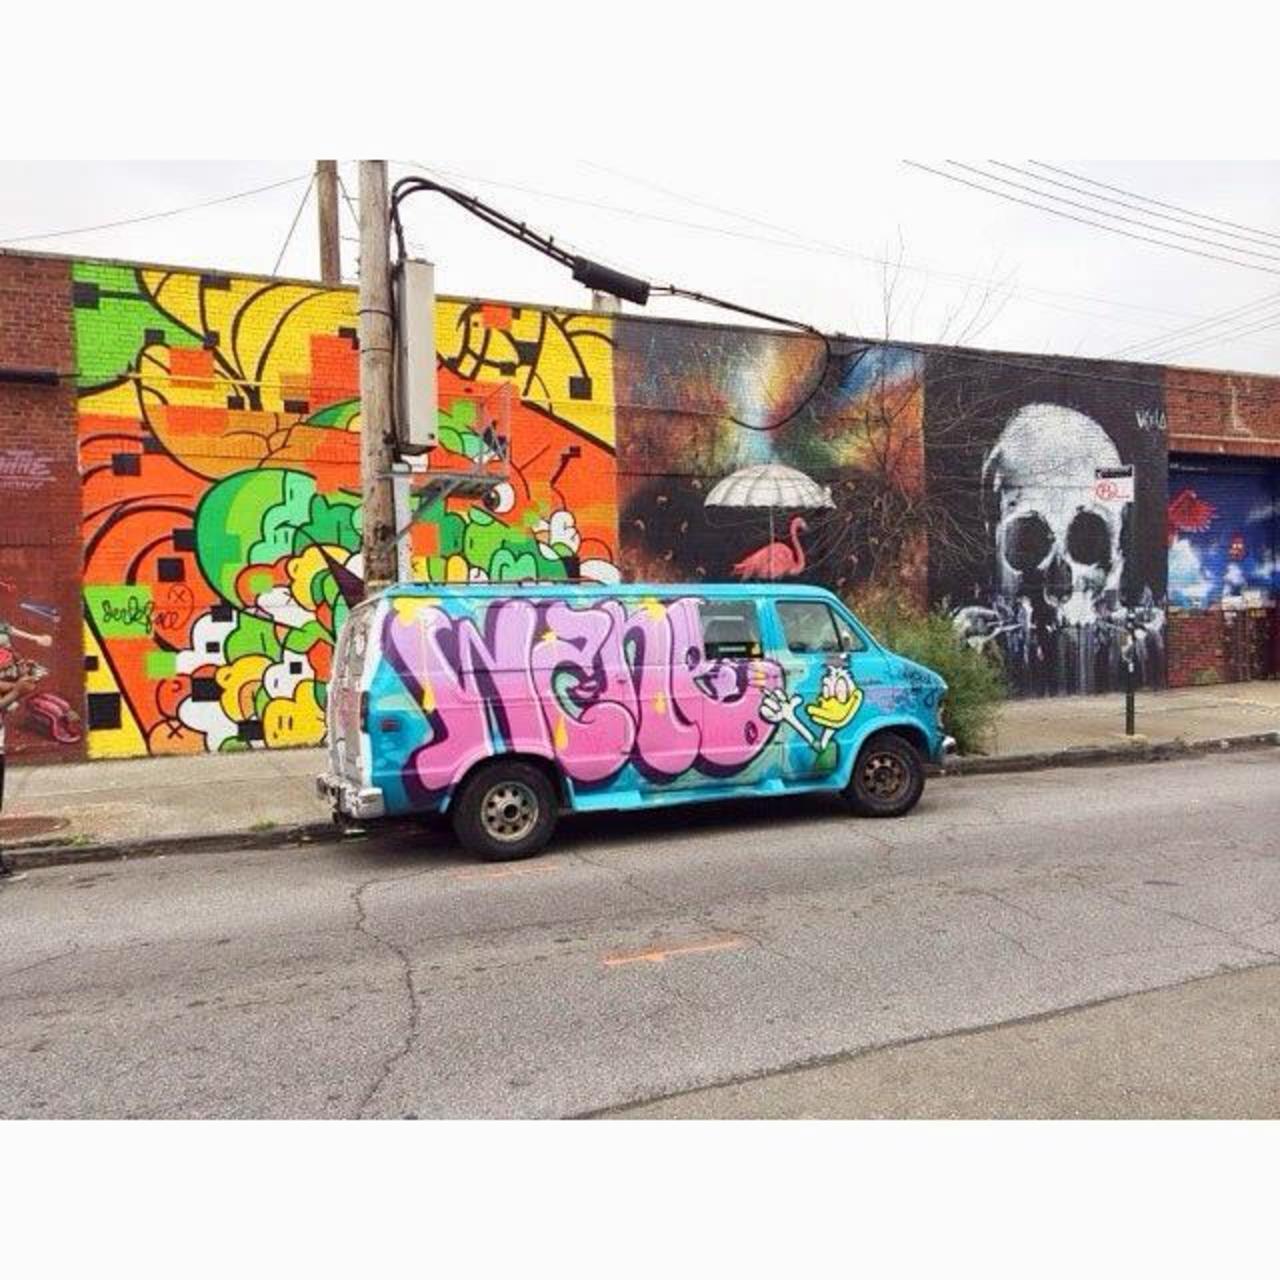 I saw this van in #brooklyn . Does anyone know of the #artist ? #streetart #graffiti http://t.co/Sk7MNqqUy9